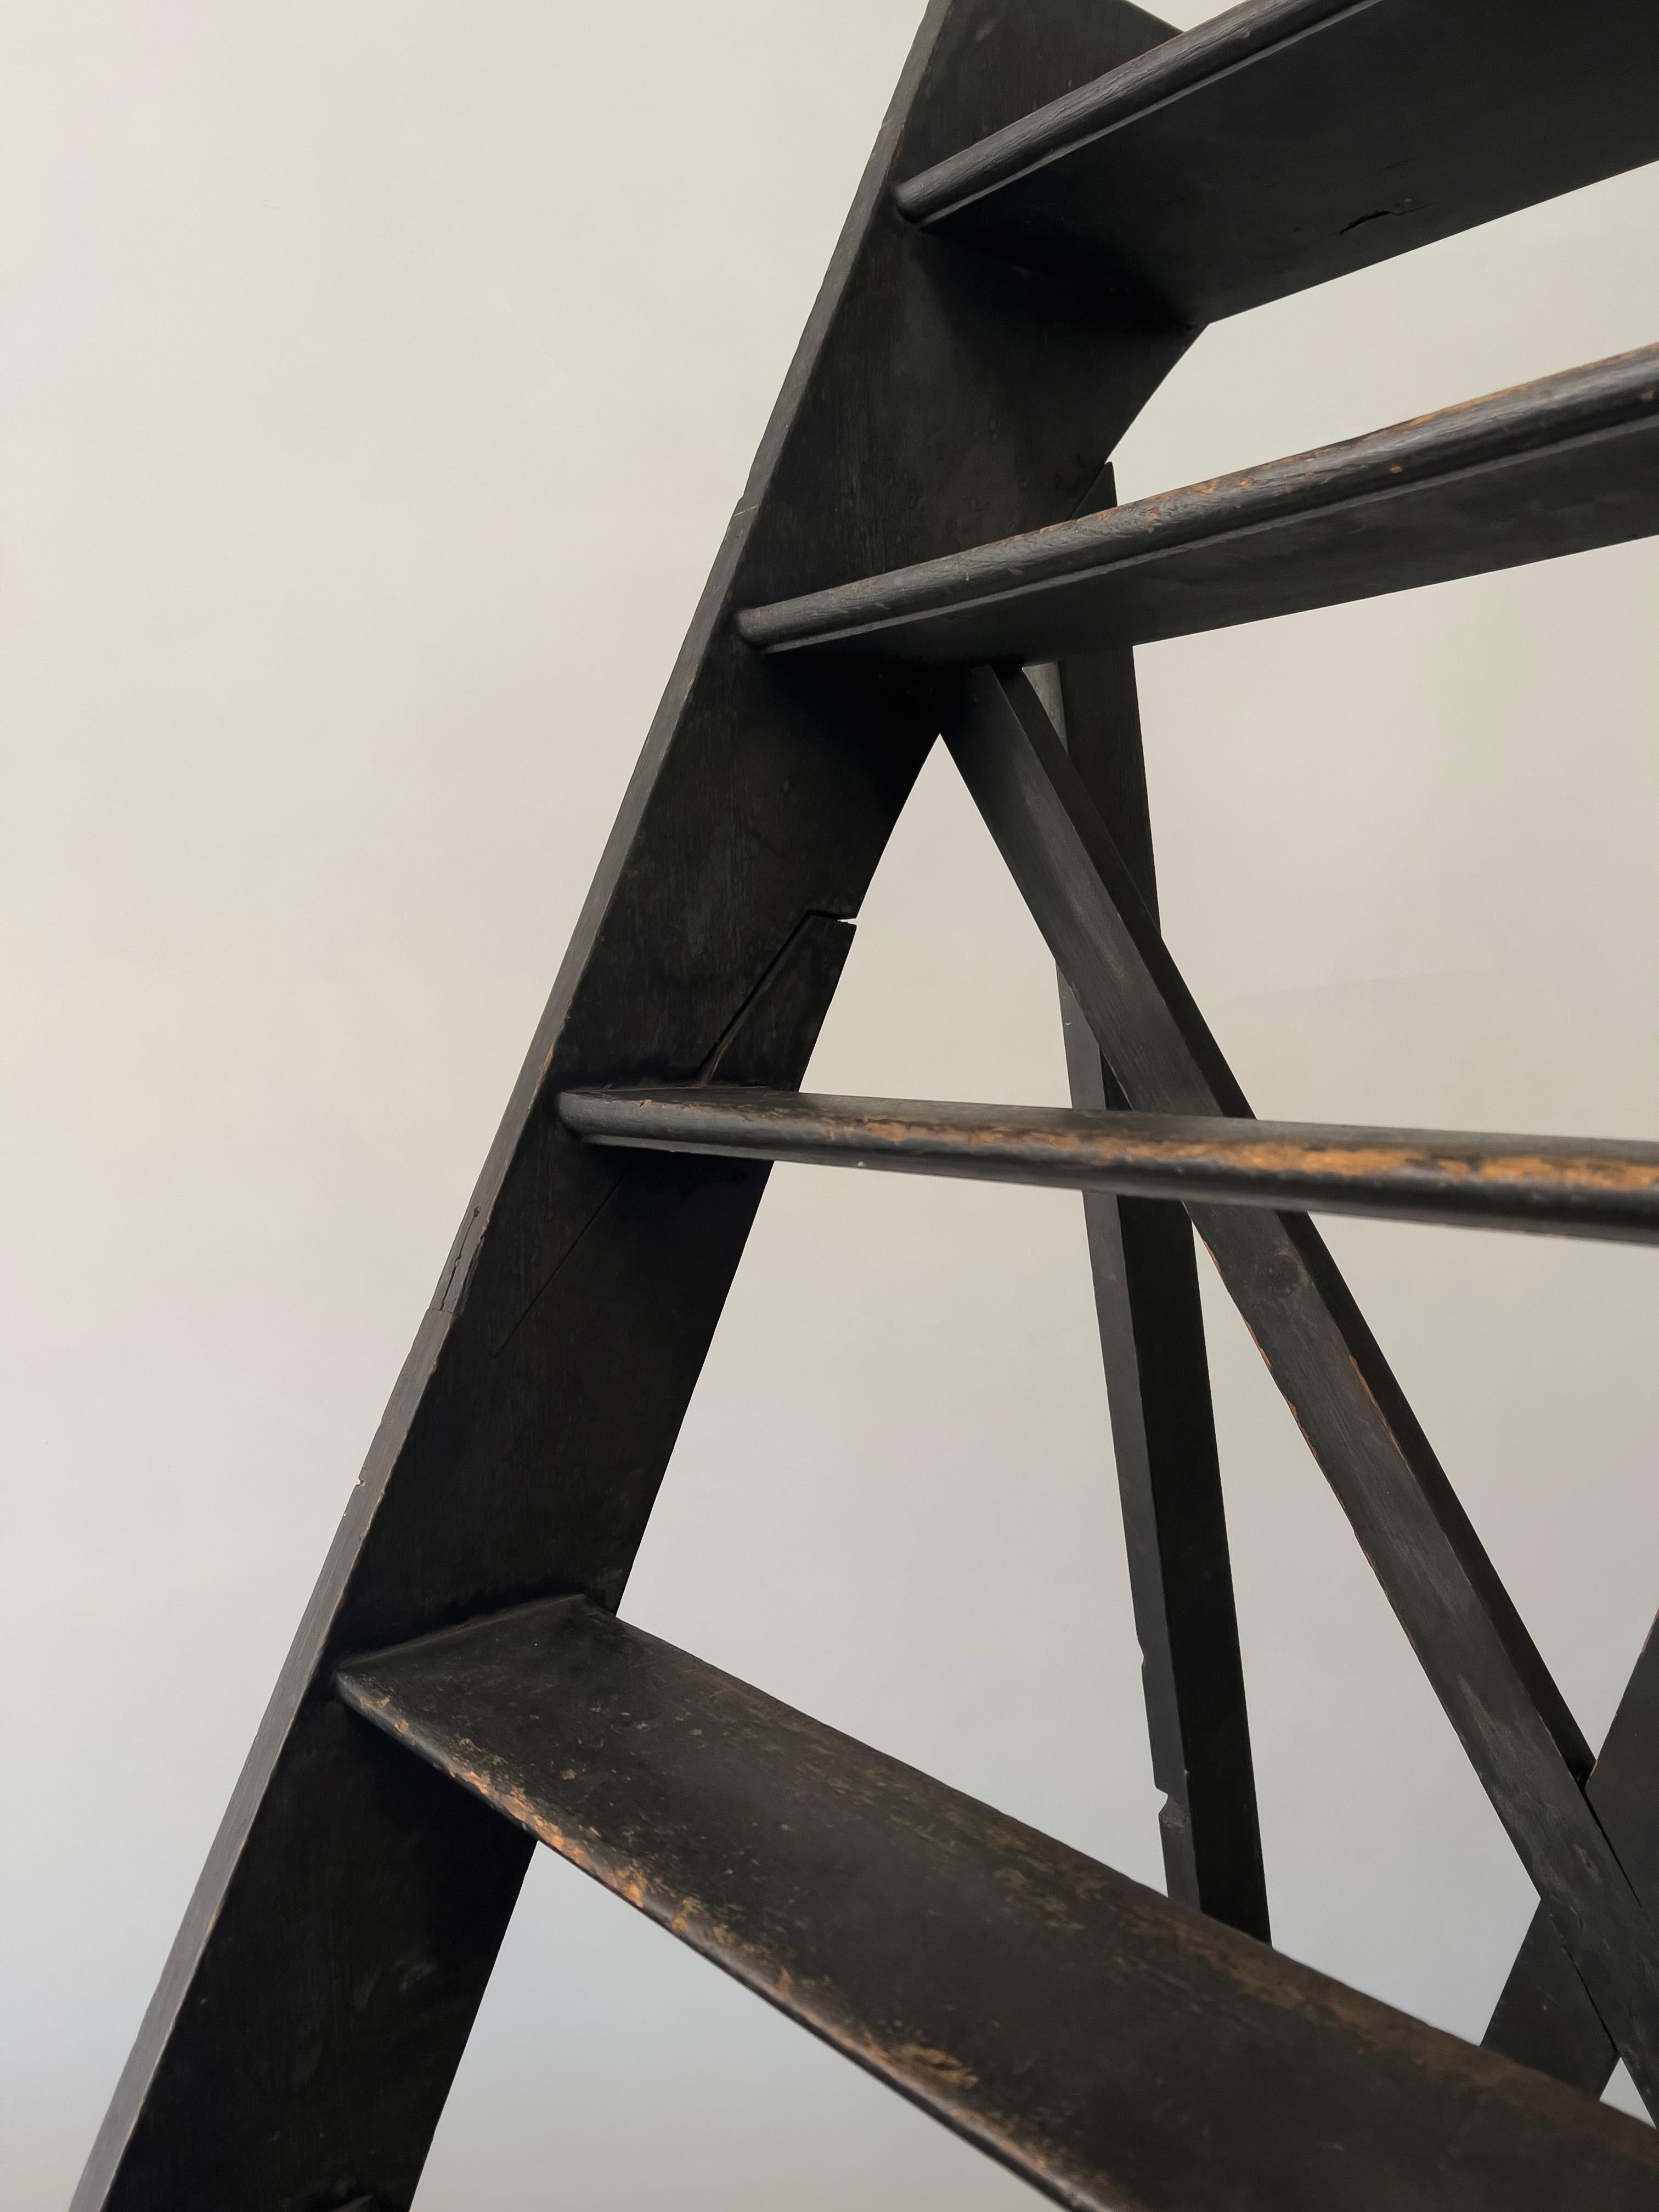 France, ca. early 1900s

Antique ladder with All wood joinery with excellent structural integrity. Original black paint on wood. Ladder has clean lines and finish has beautiful patina. Wear consistent with age.

22